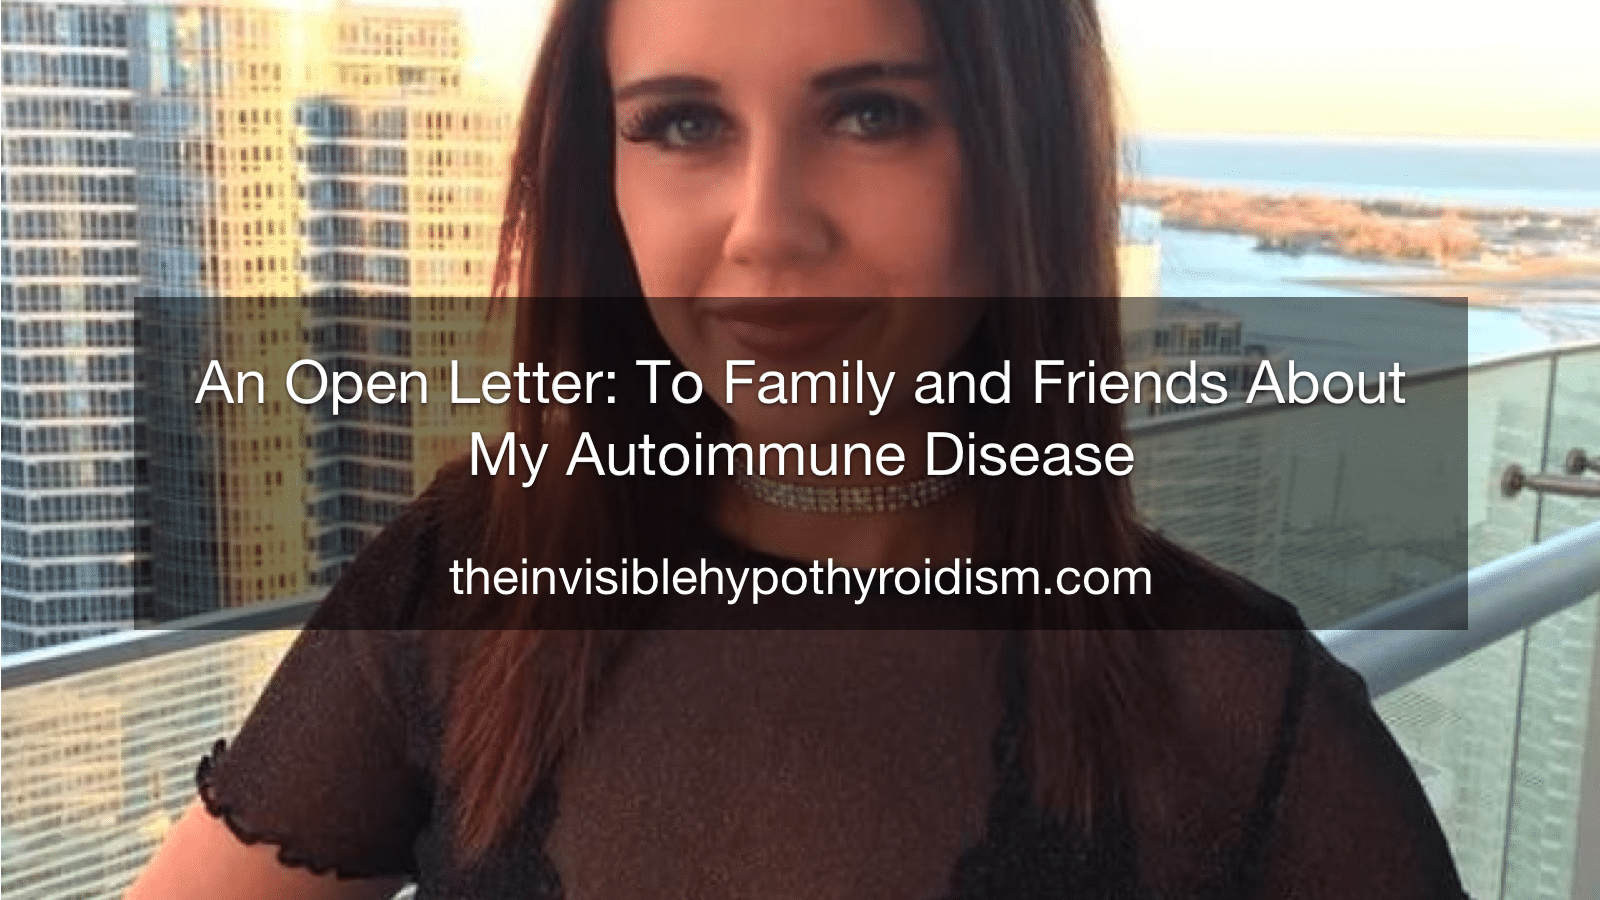 An Open Letter: To Family and Friends About My Autoimmune Disease